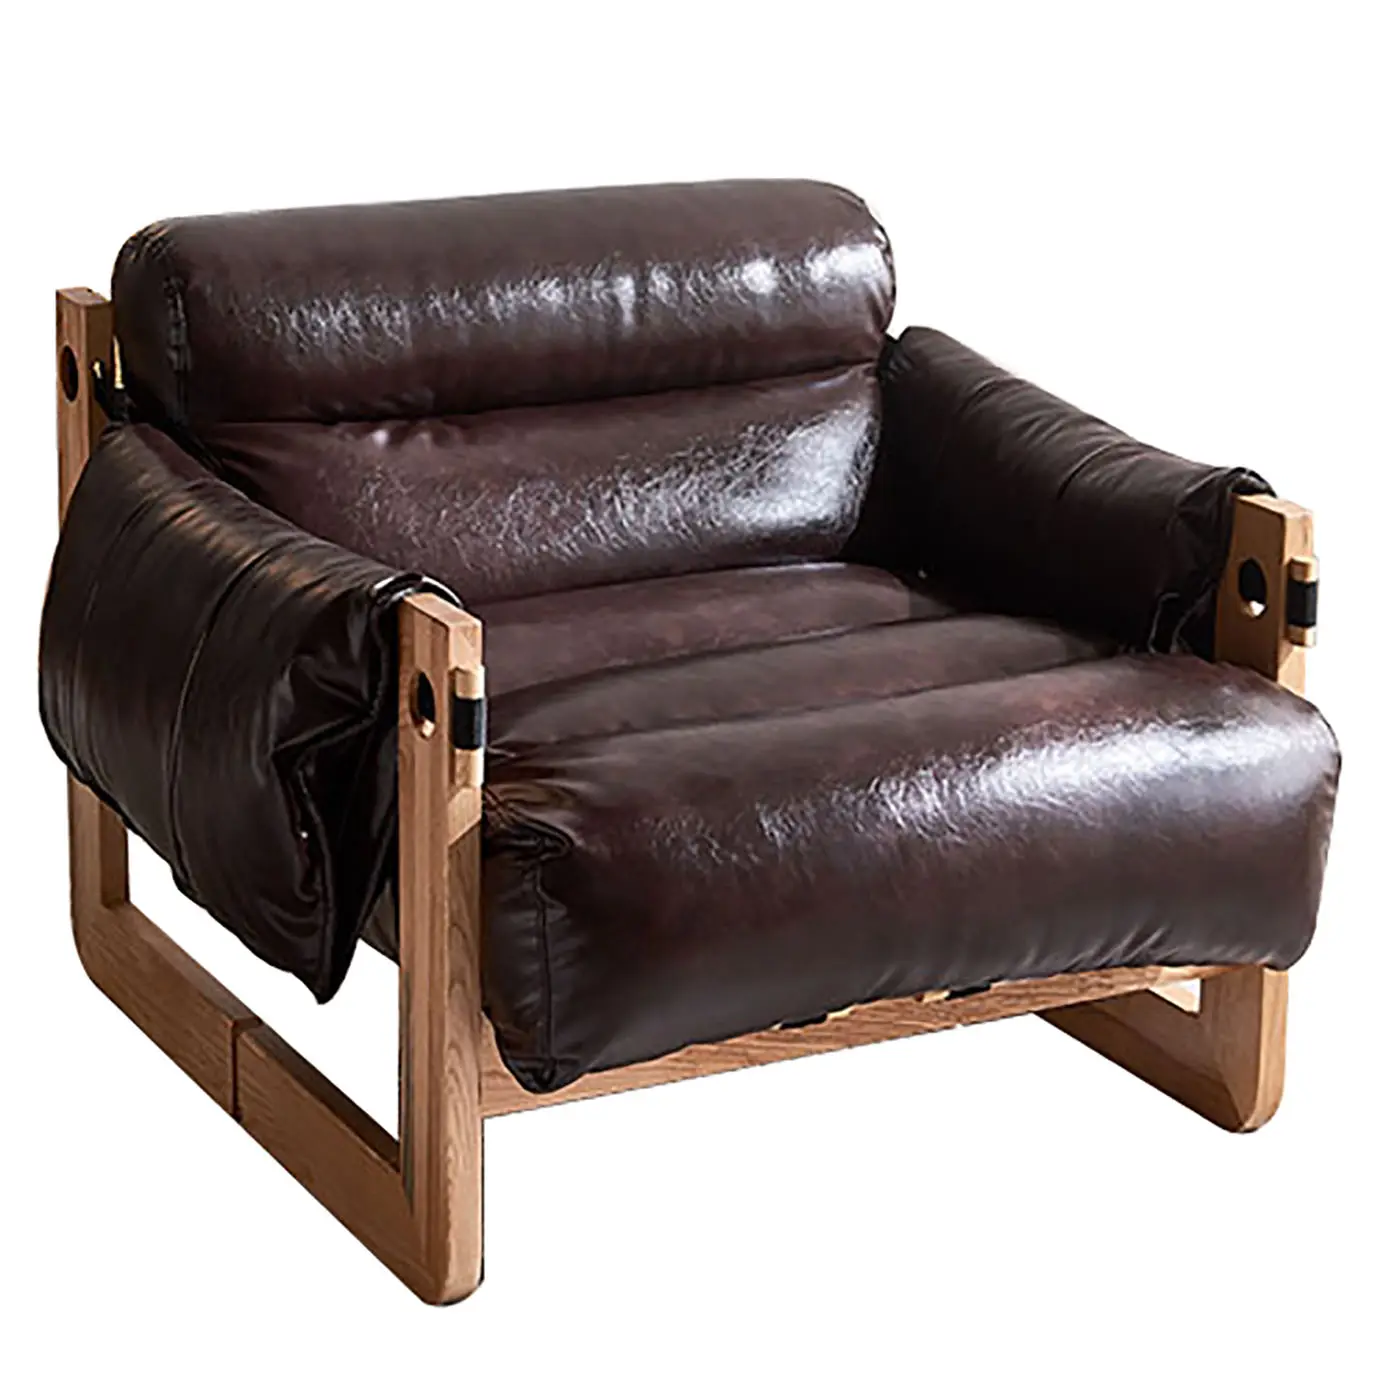 Nordic retro single person solid wood sofa chair living room designer casual leather lounge chair